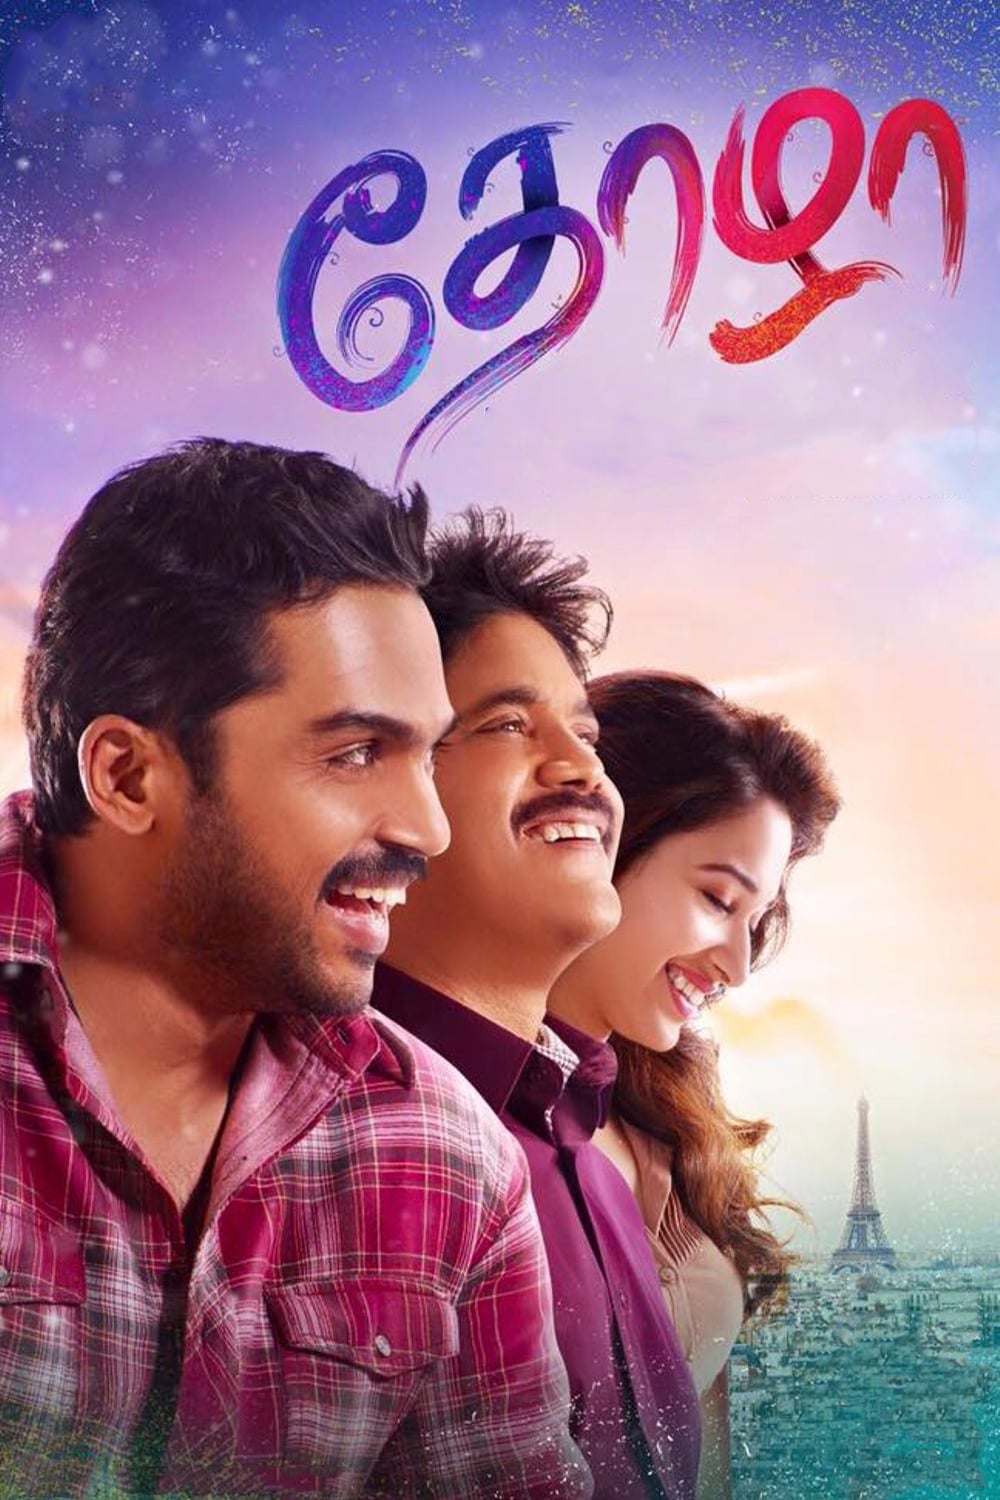 Poster for the movie "Thozha"